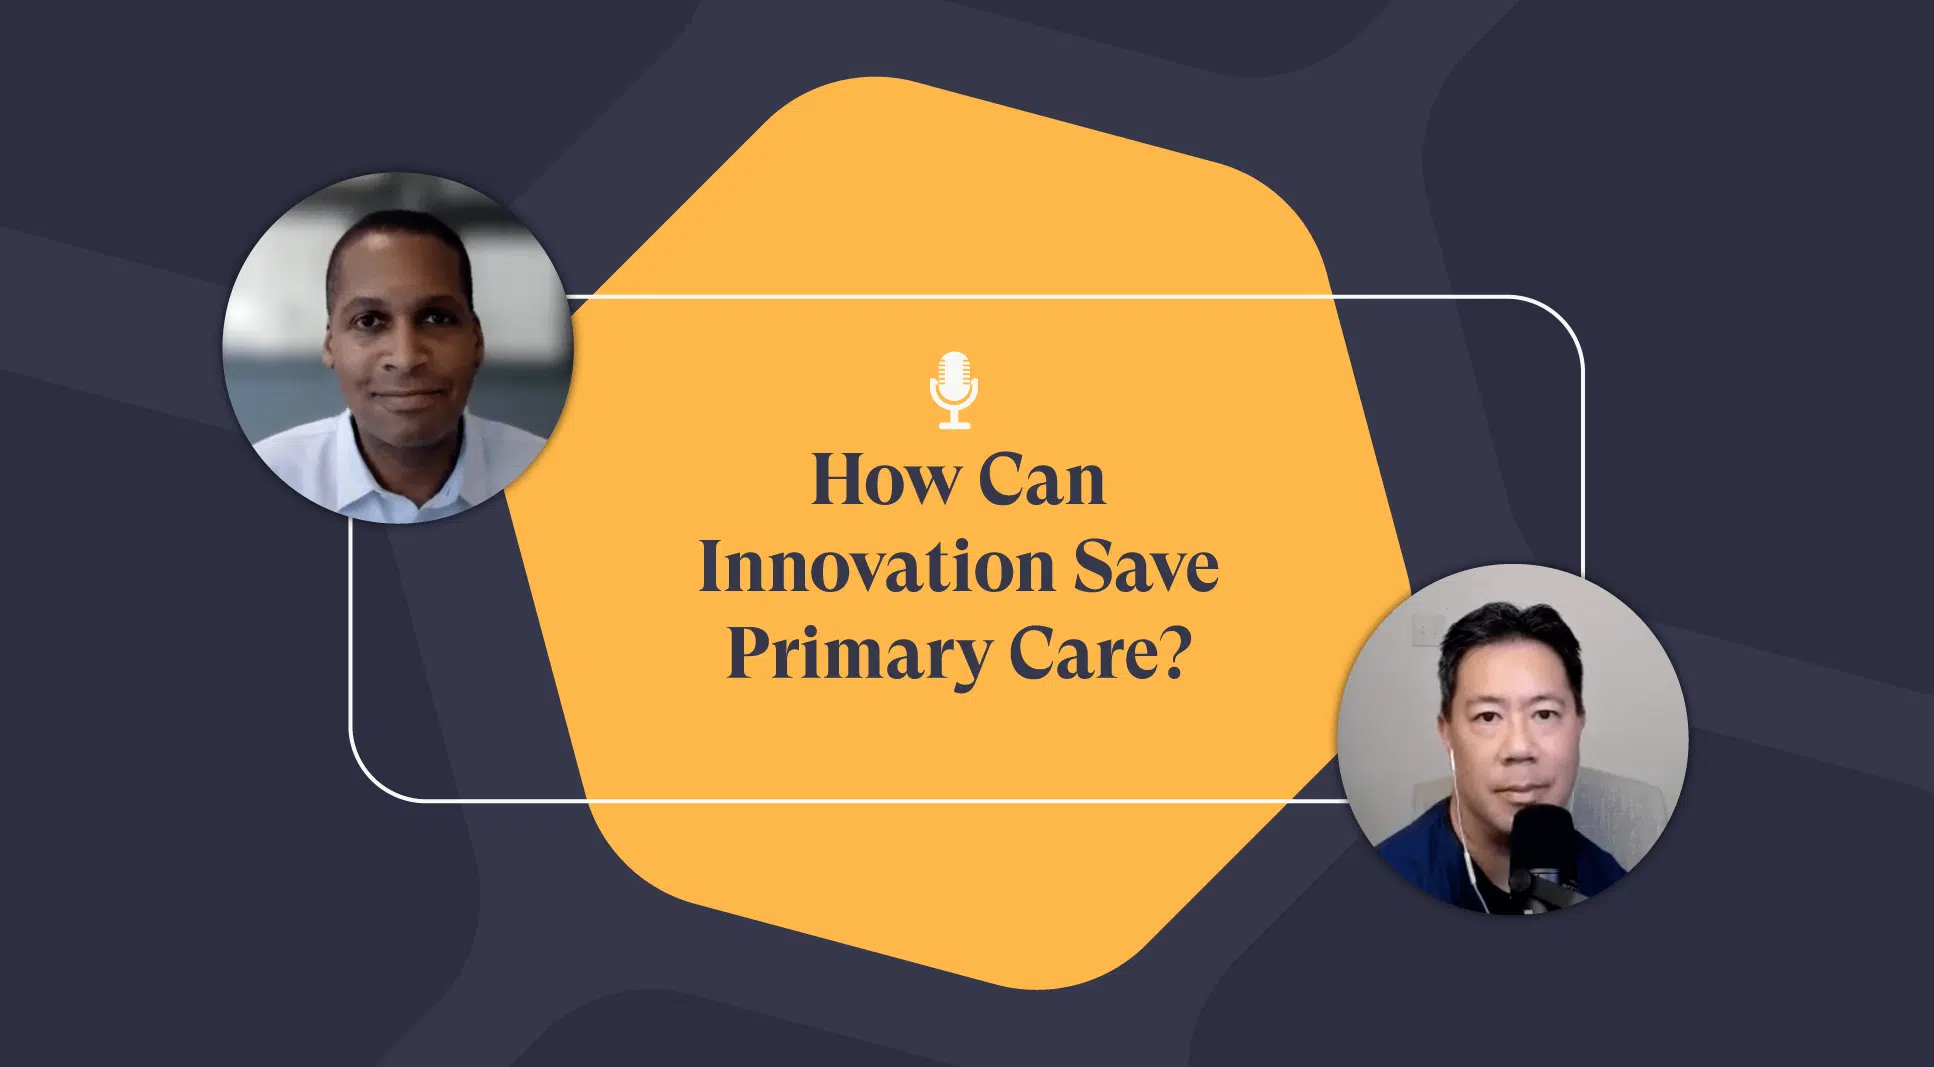 How Can Innovation Save Primary Care?